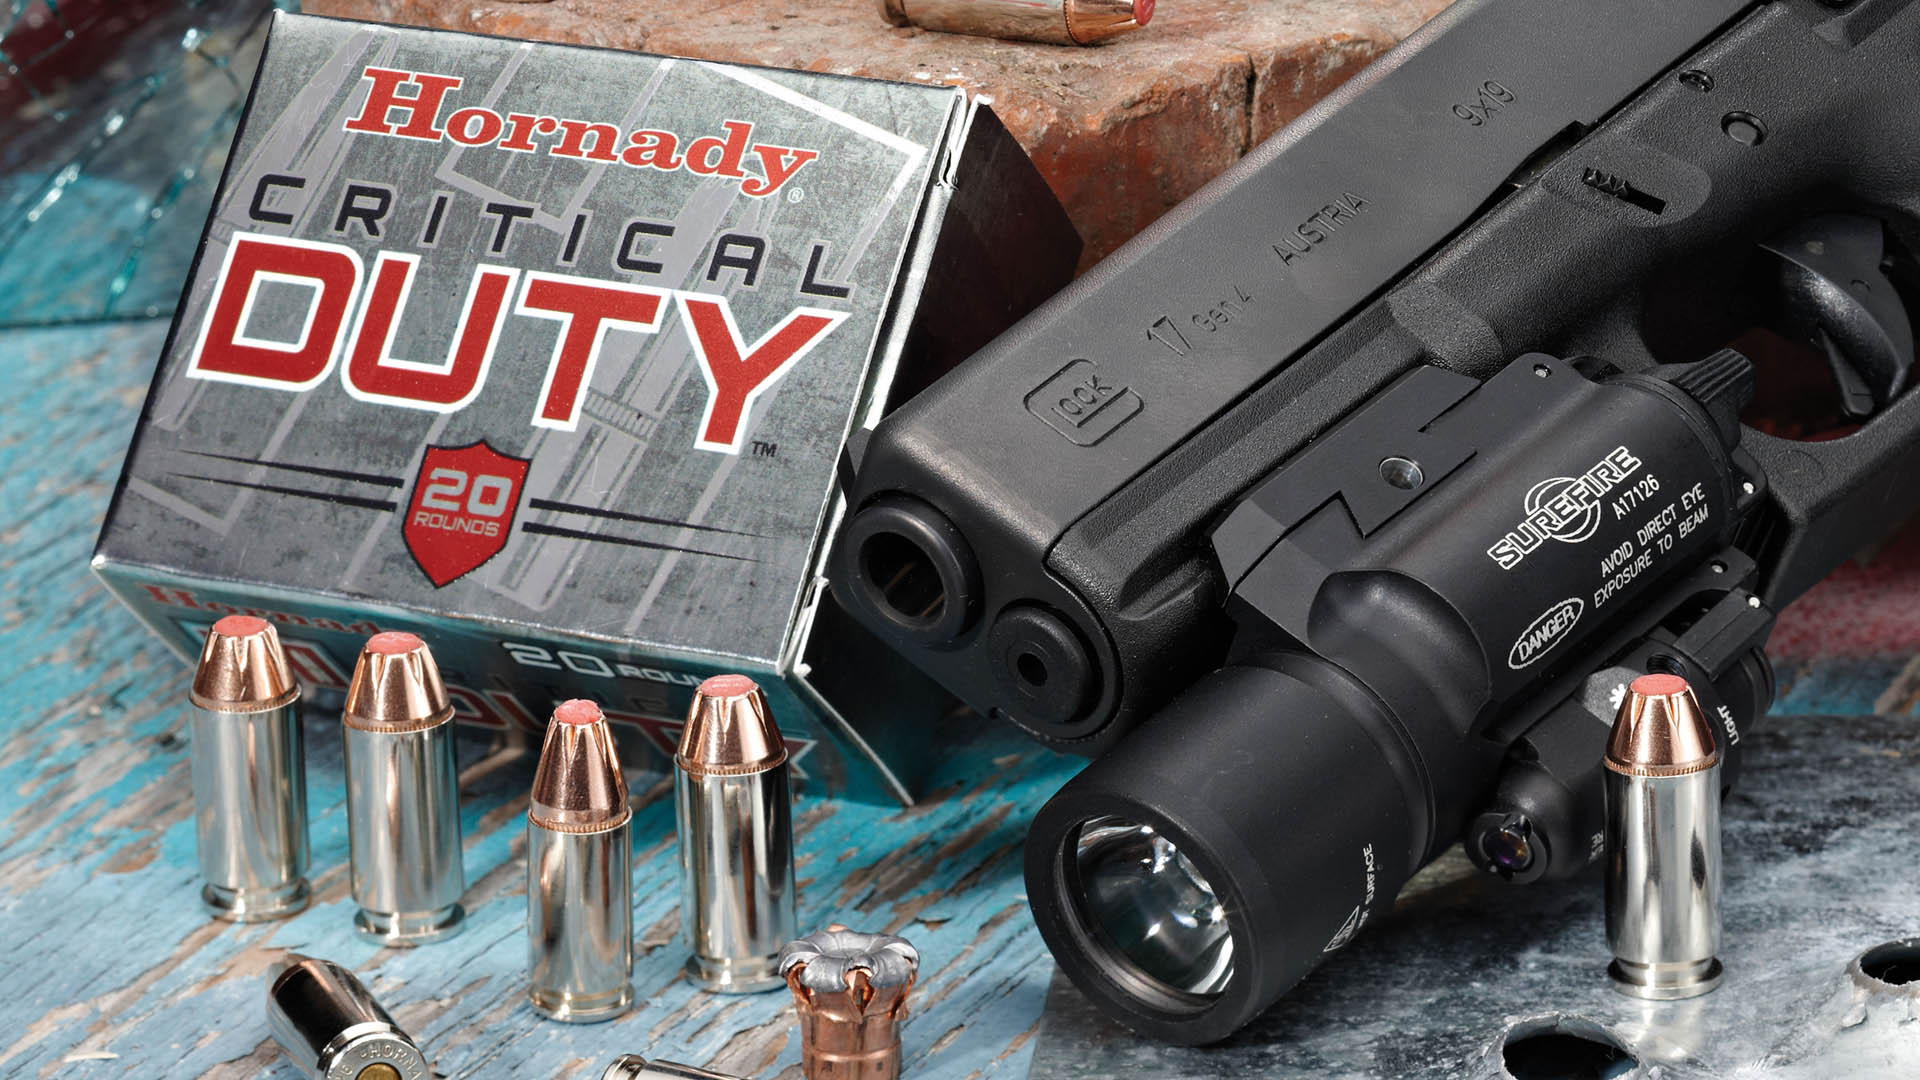 Police firearms: How to inspect your duty ammunition